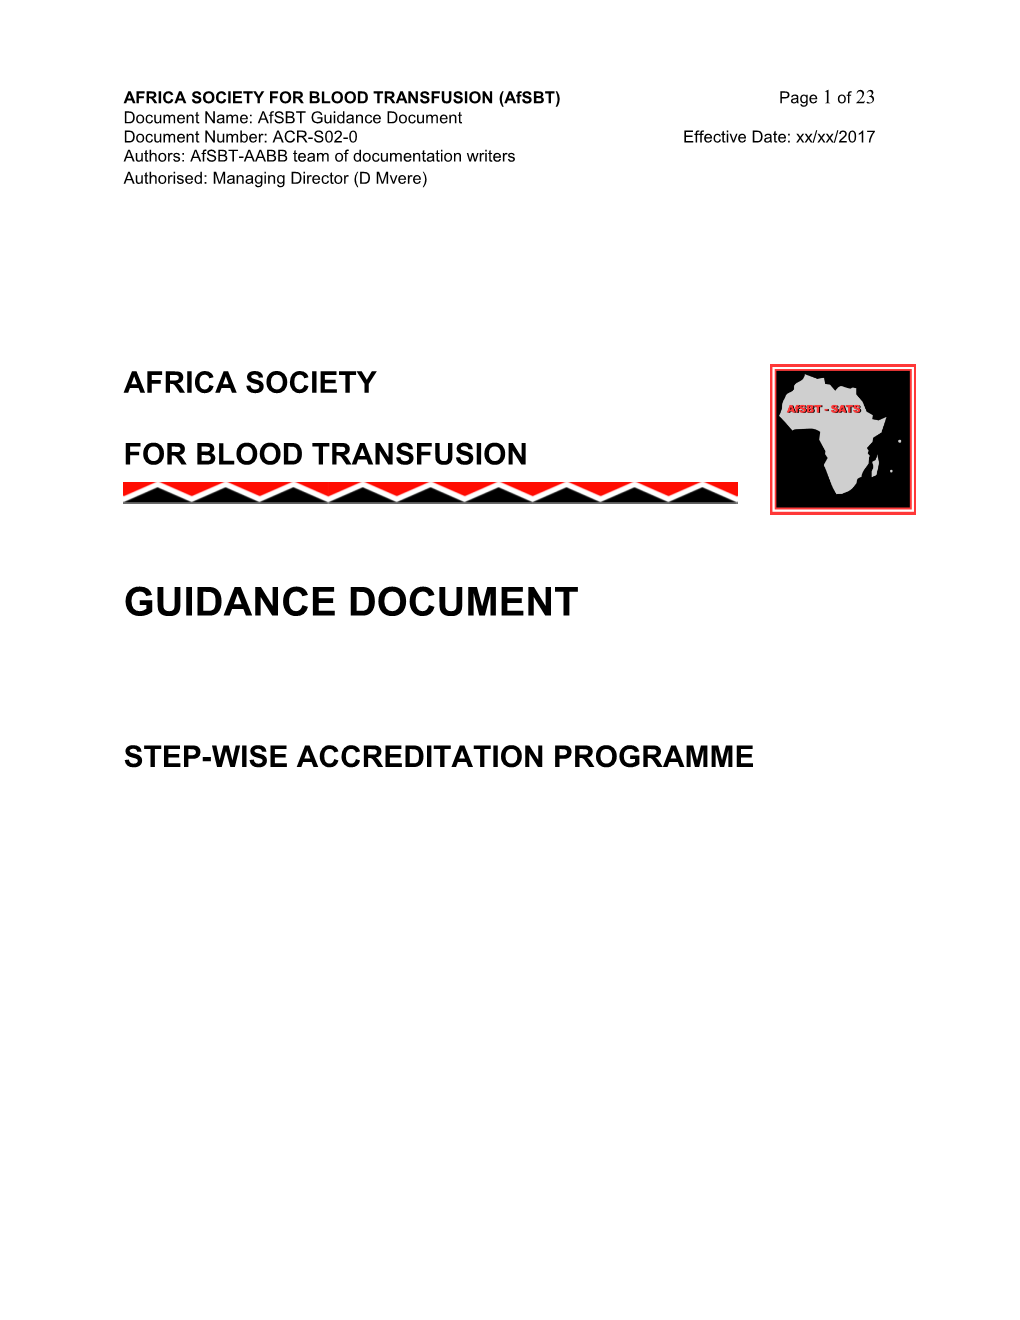 Africa Society for Blood Transfusion Standards Guidance Document